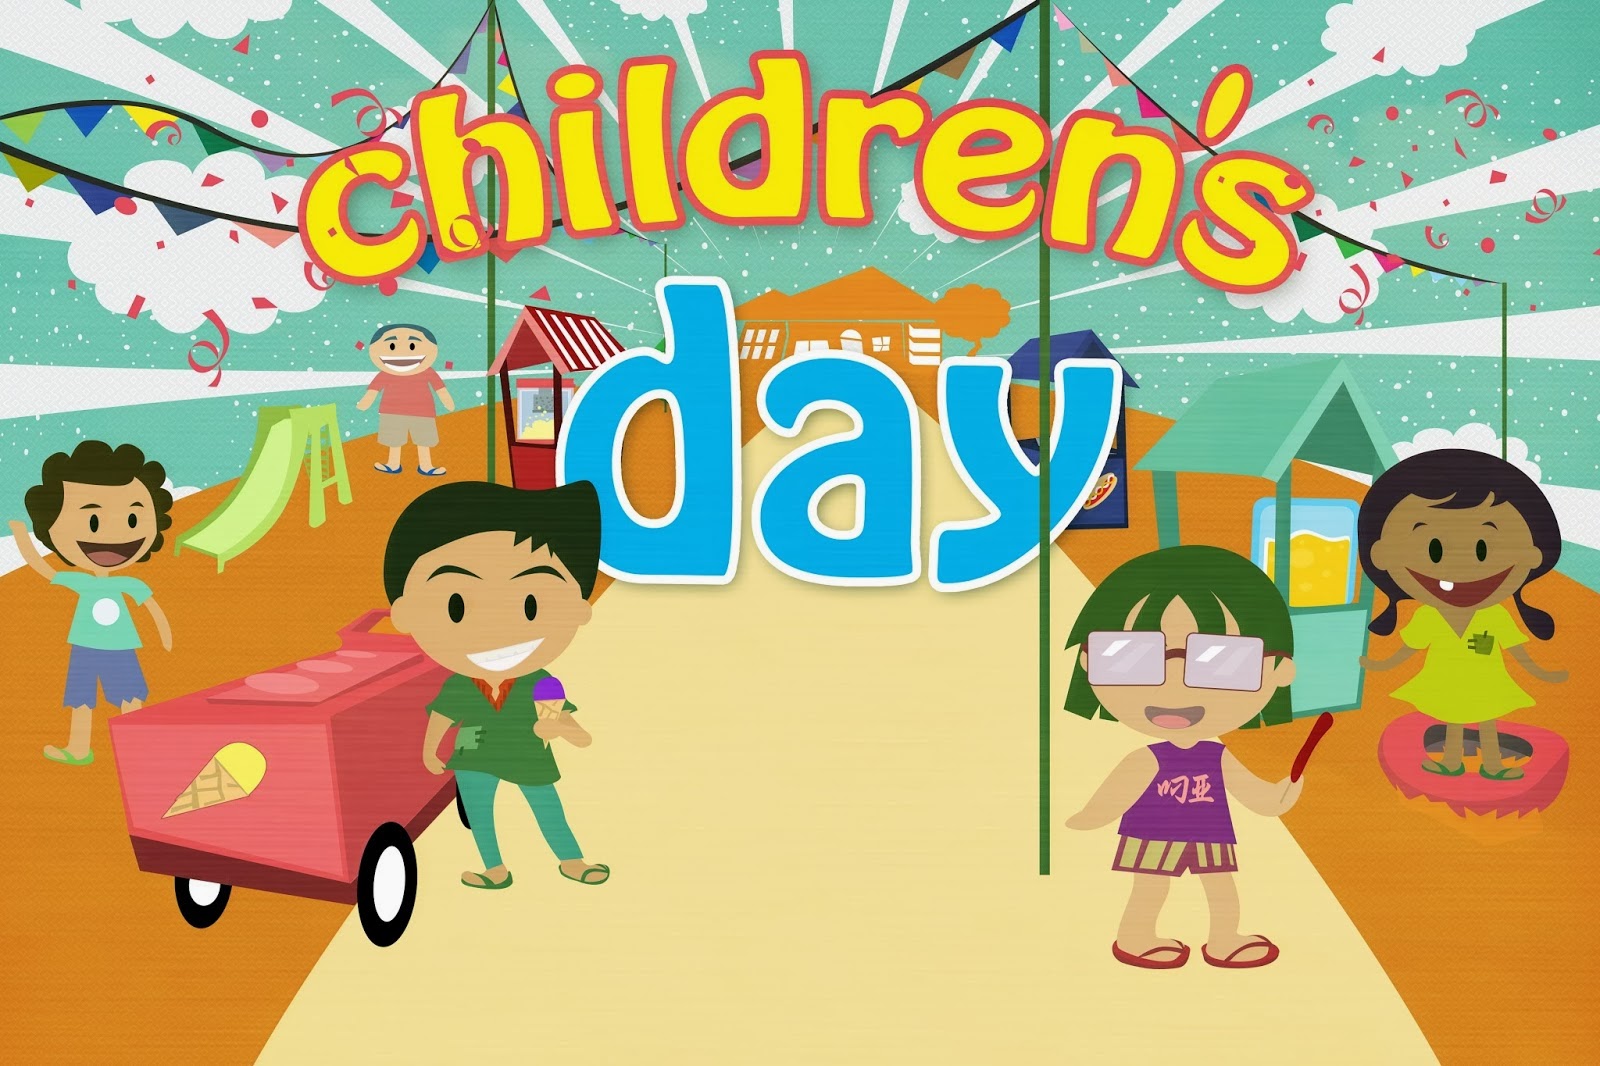 Wish You A Happy Children's Day - HD Wallpaper 